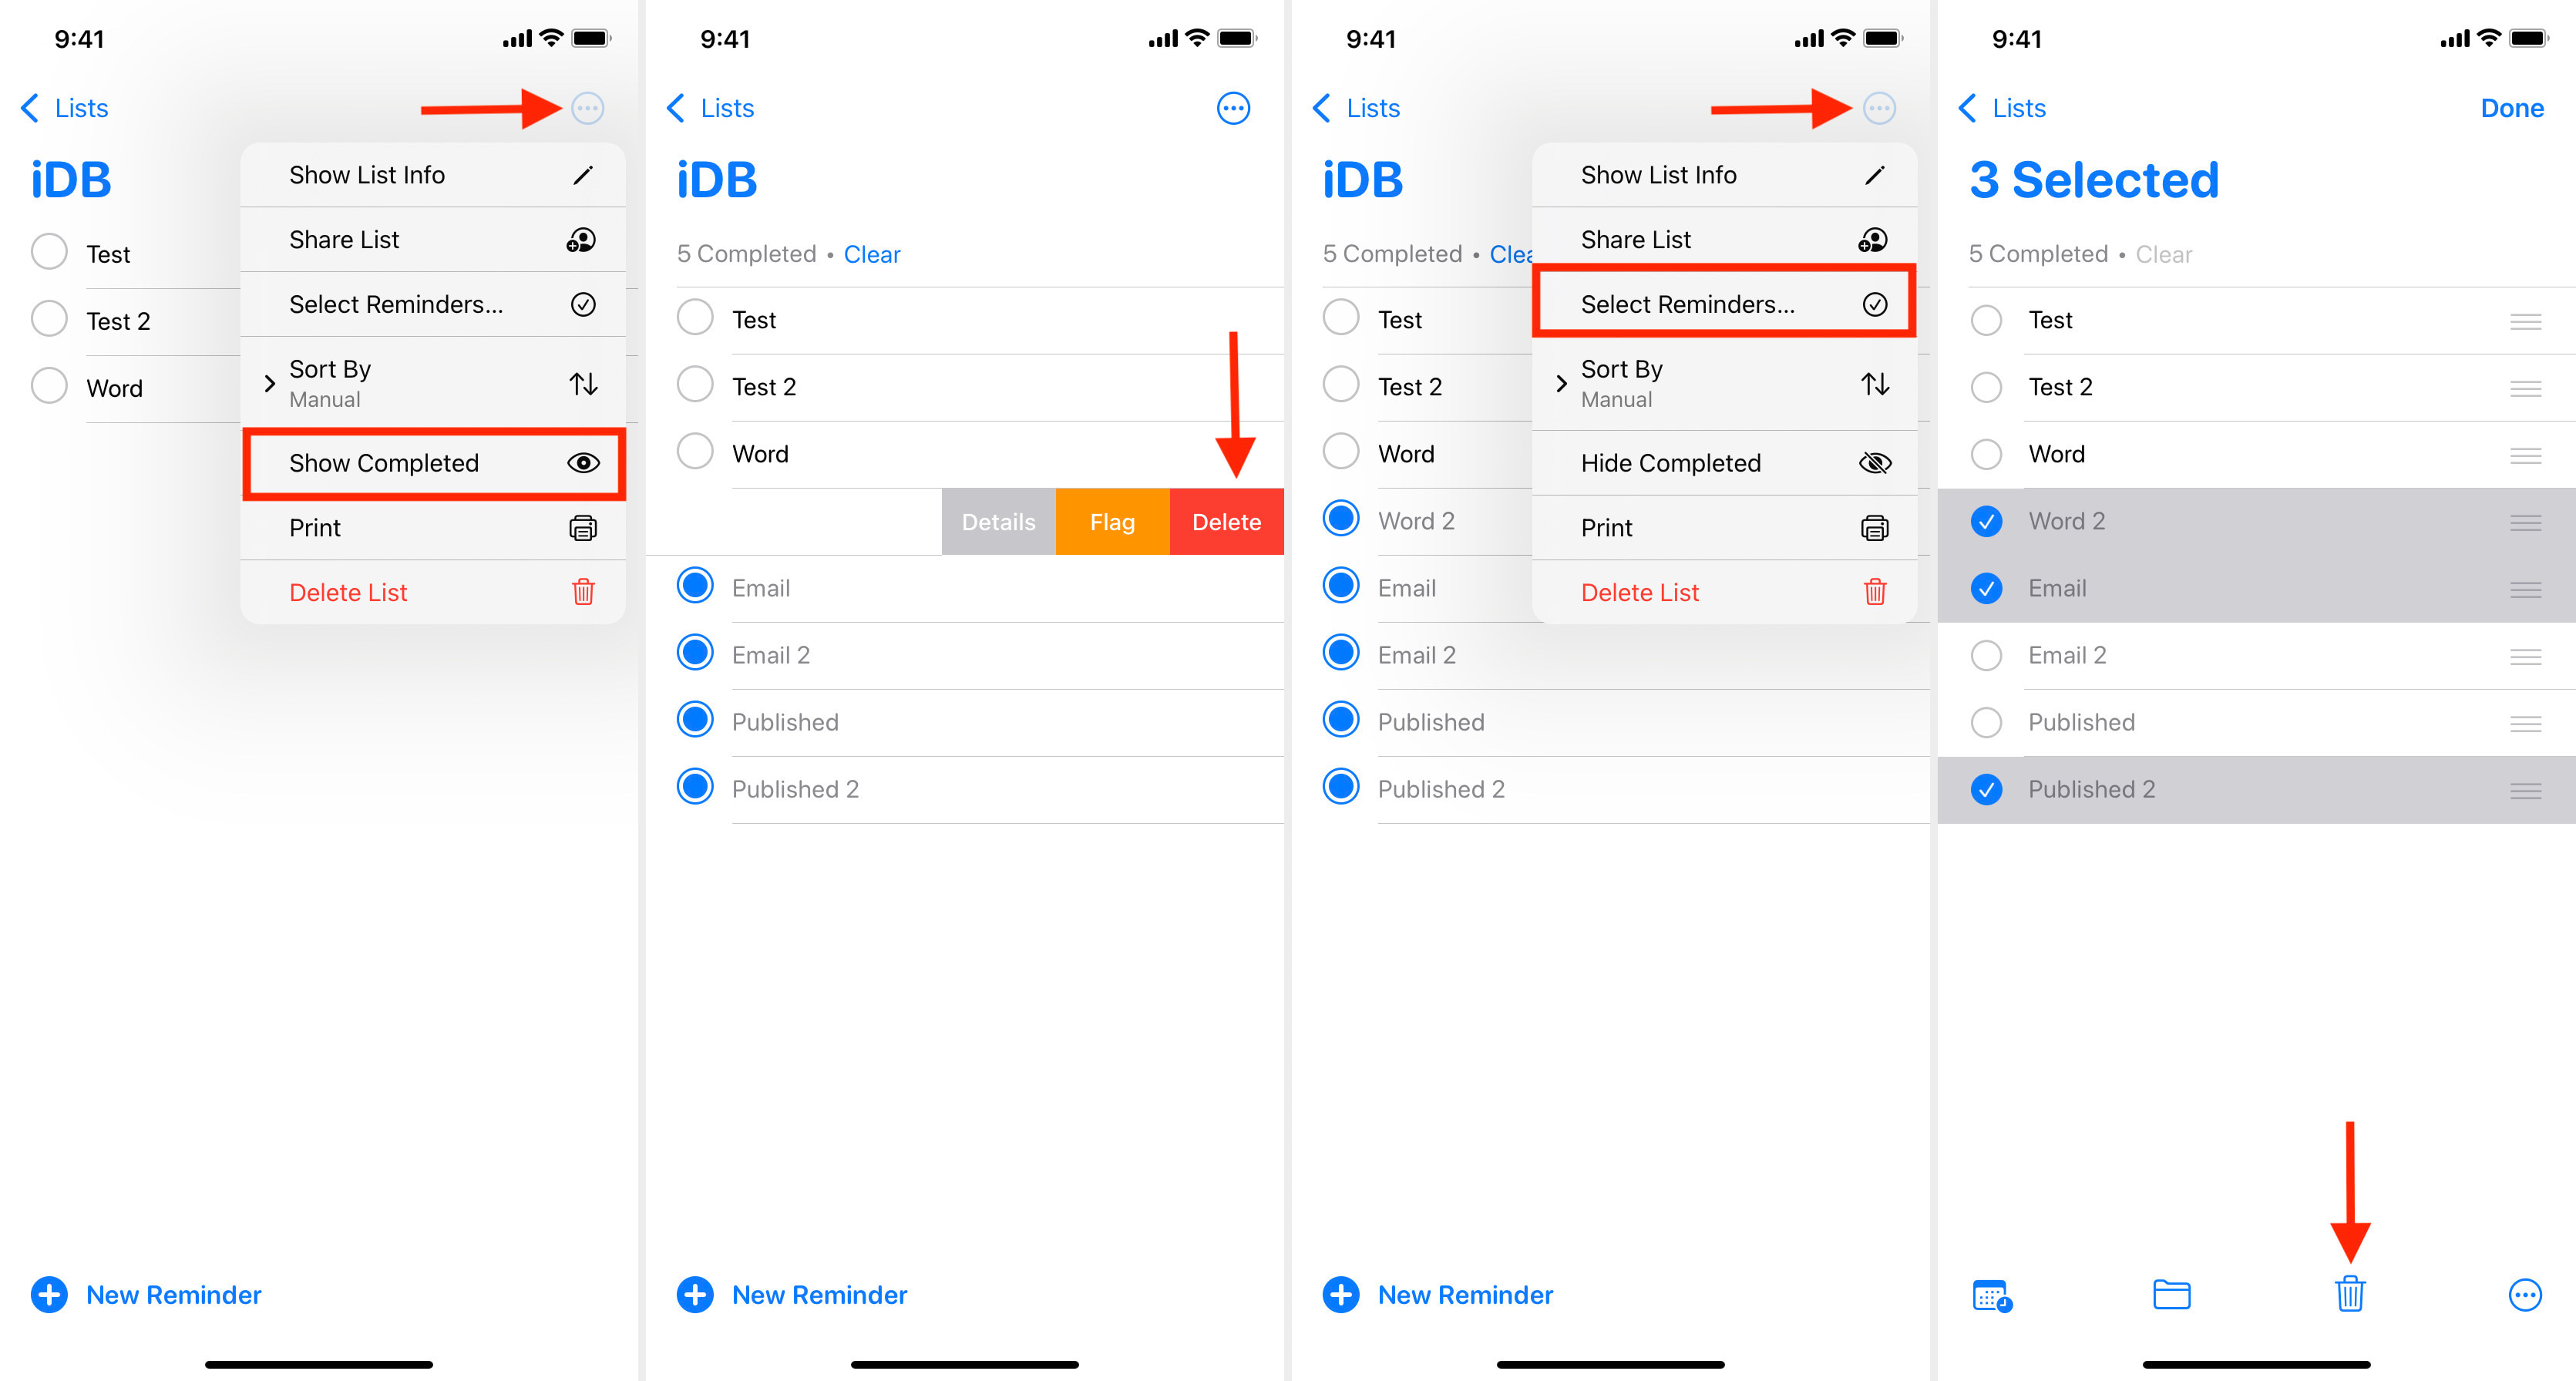 How to delete one or selected completed reminders on iPhone